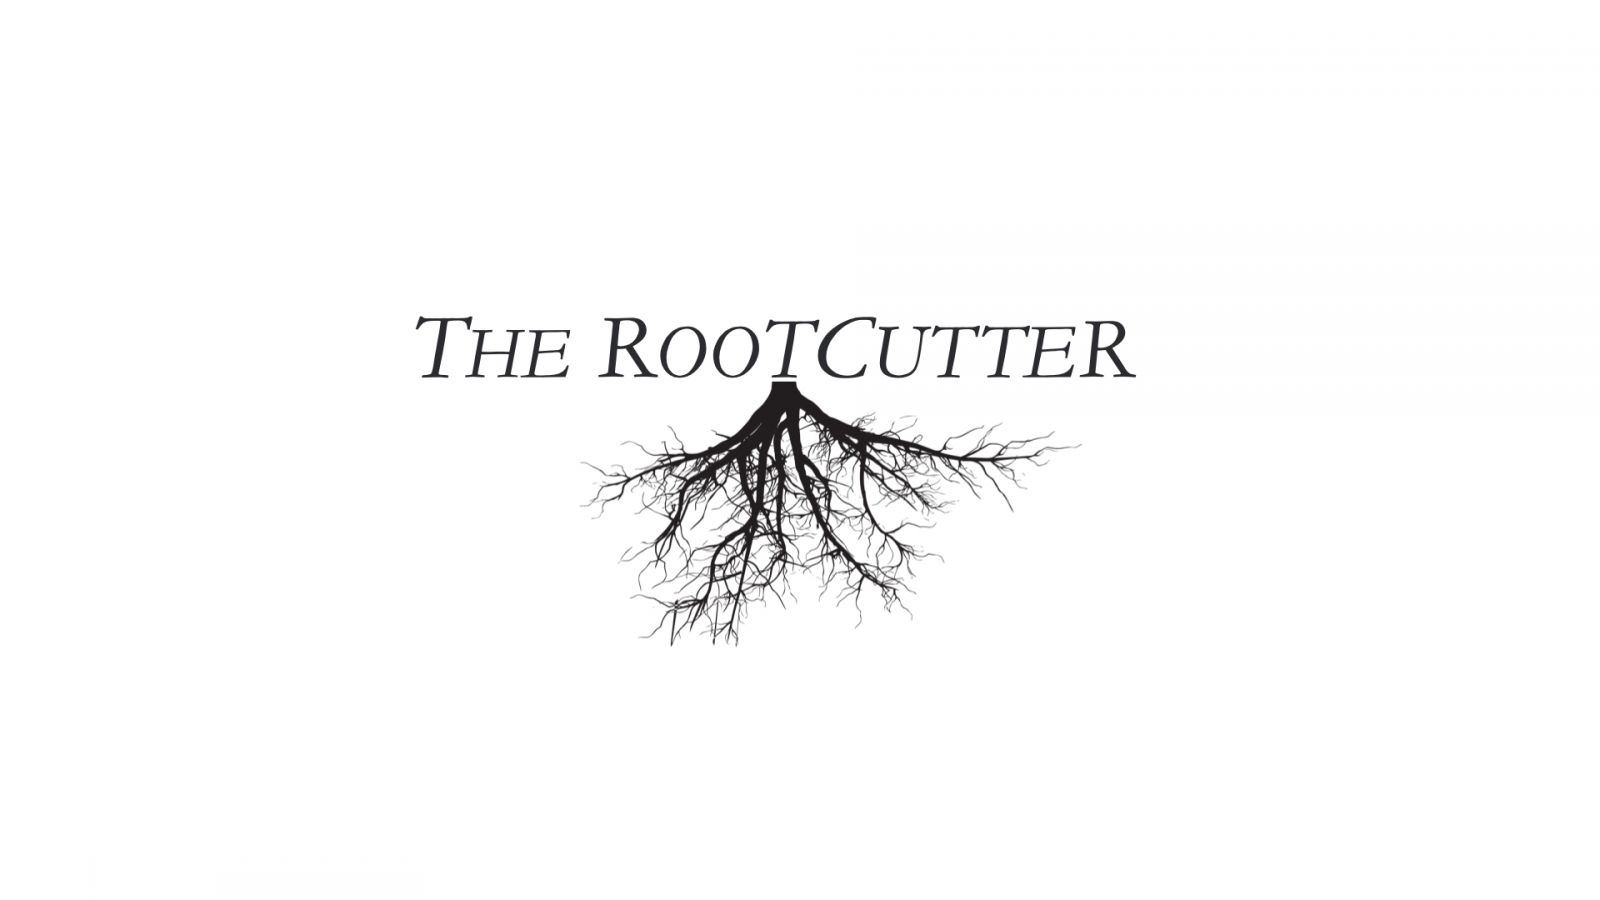 The Rootcutter's logo